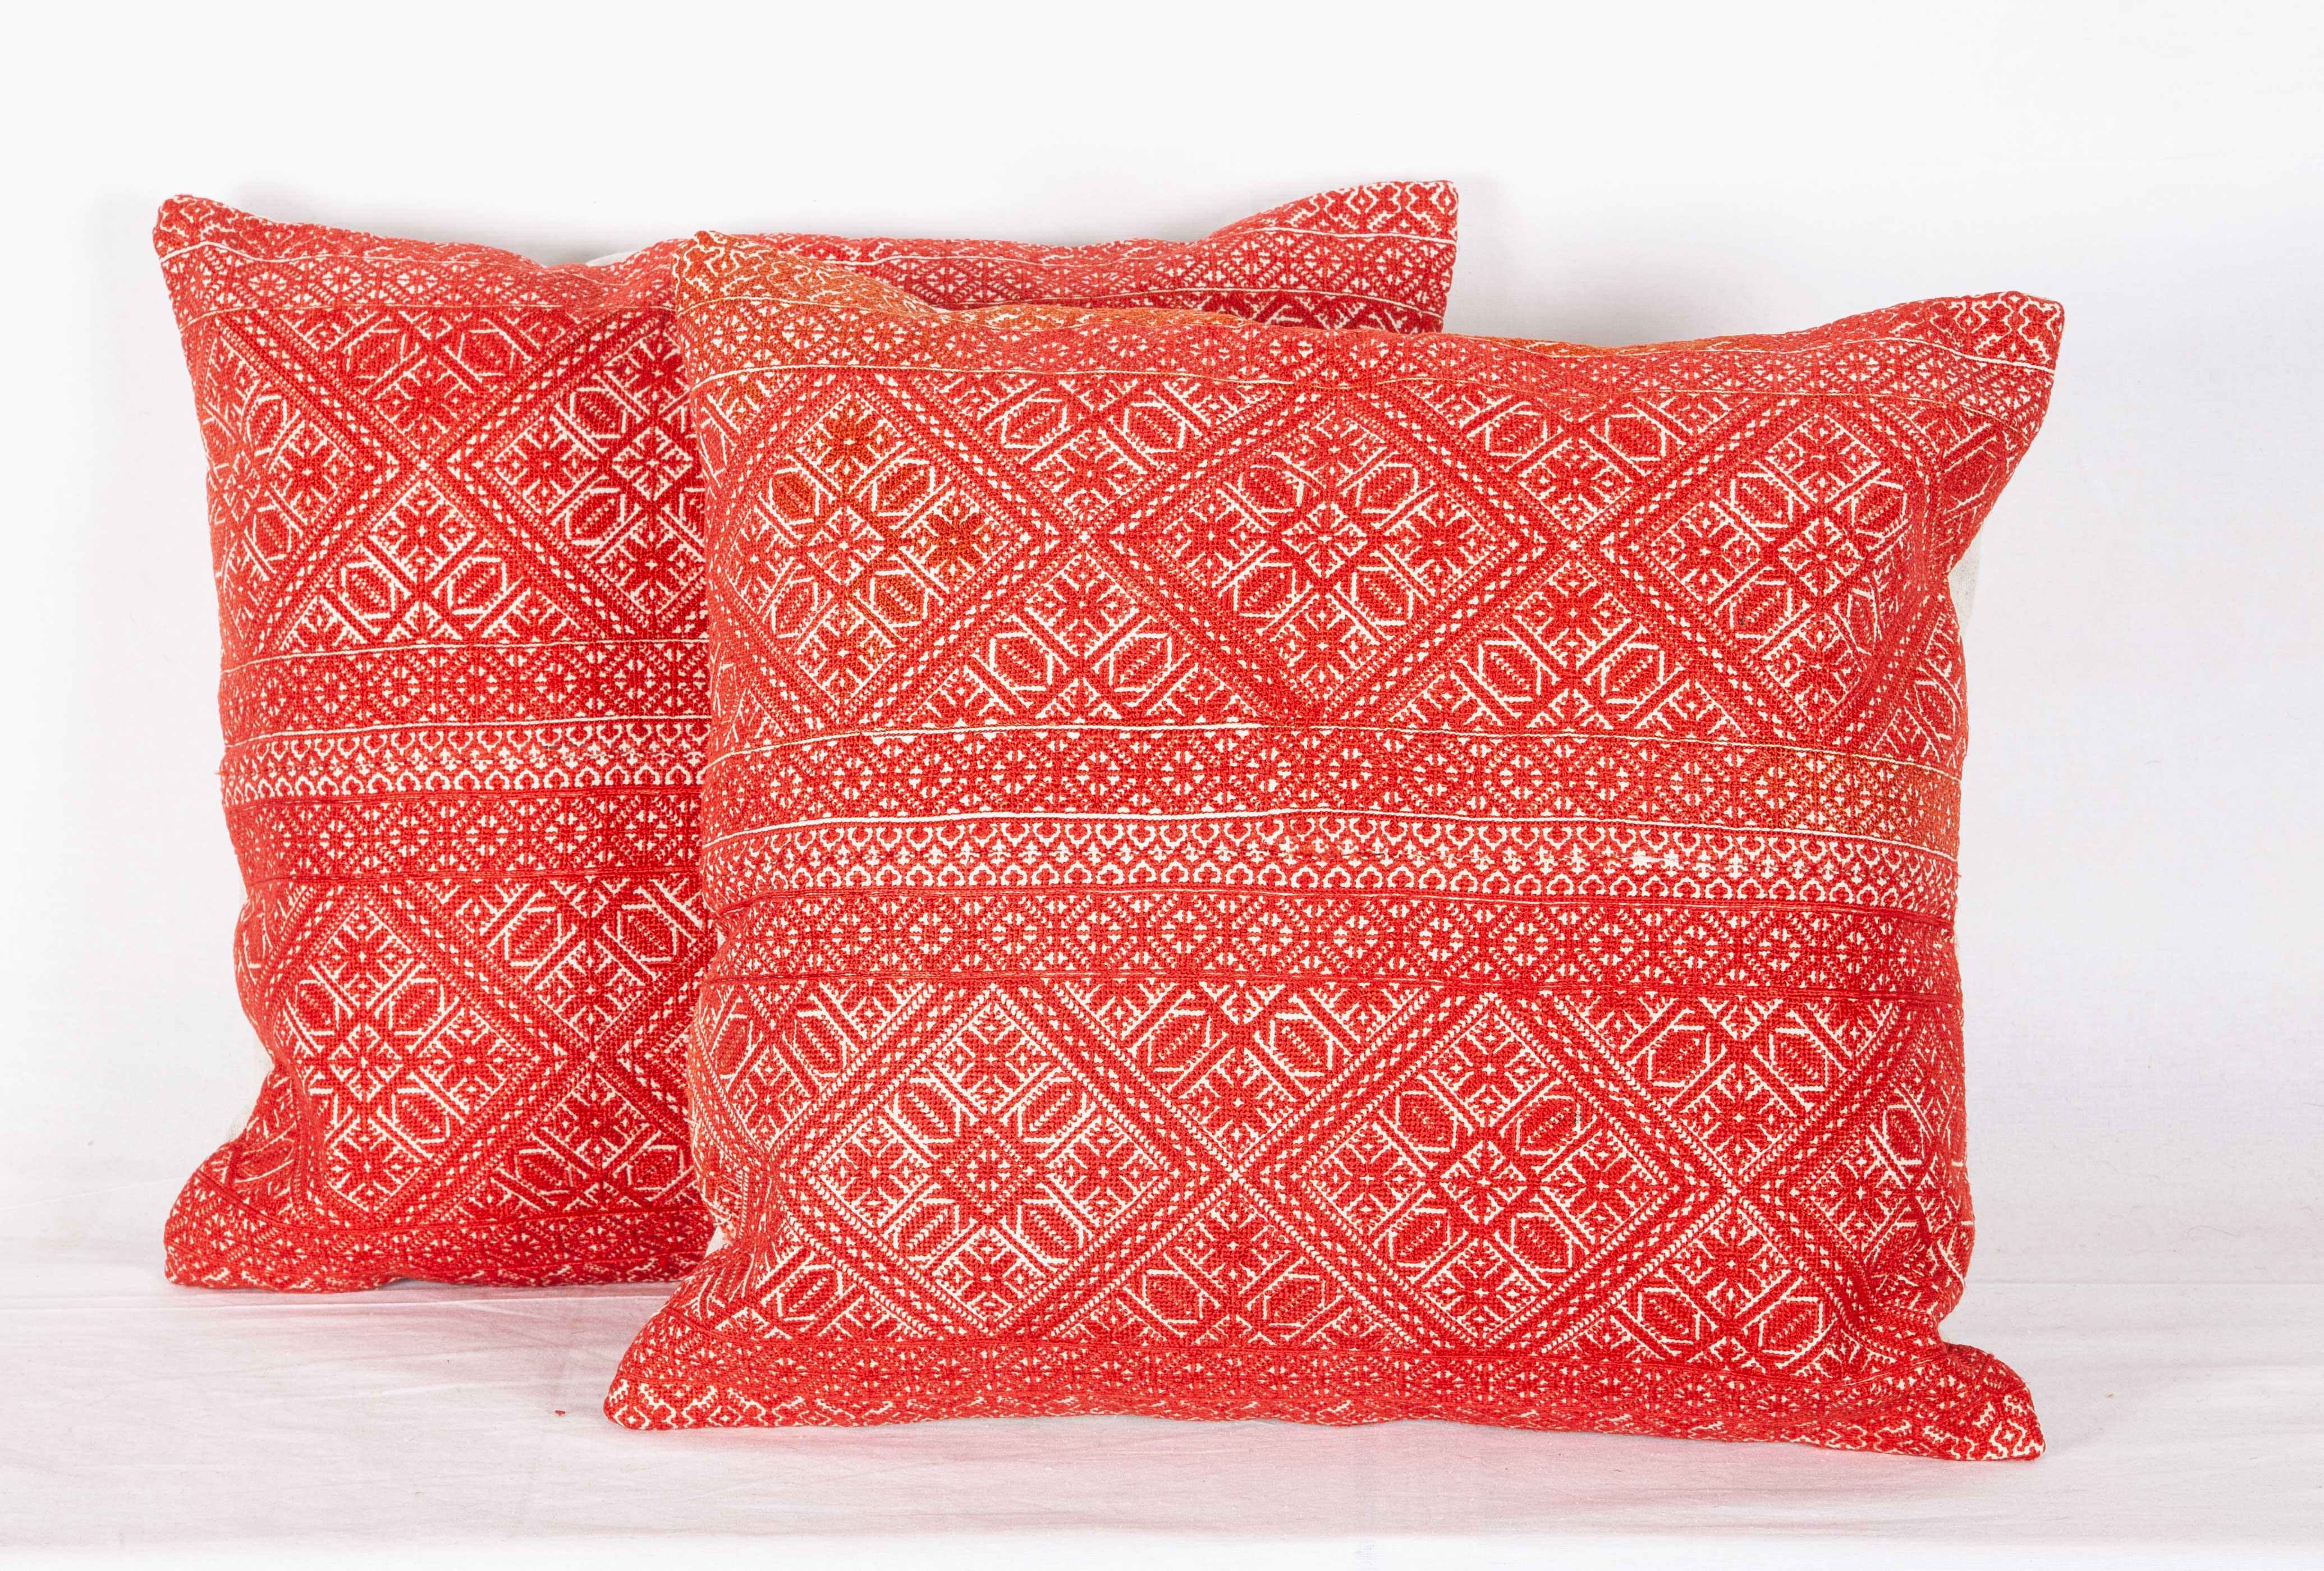 Embroidered Pillow Case Made from an Early 20th Century Fez Embroidery from Morocco For Sale